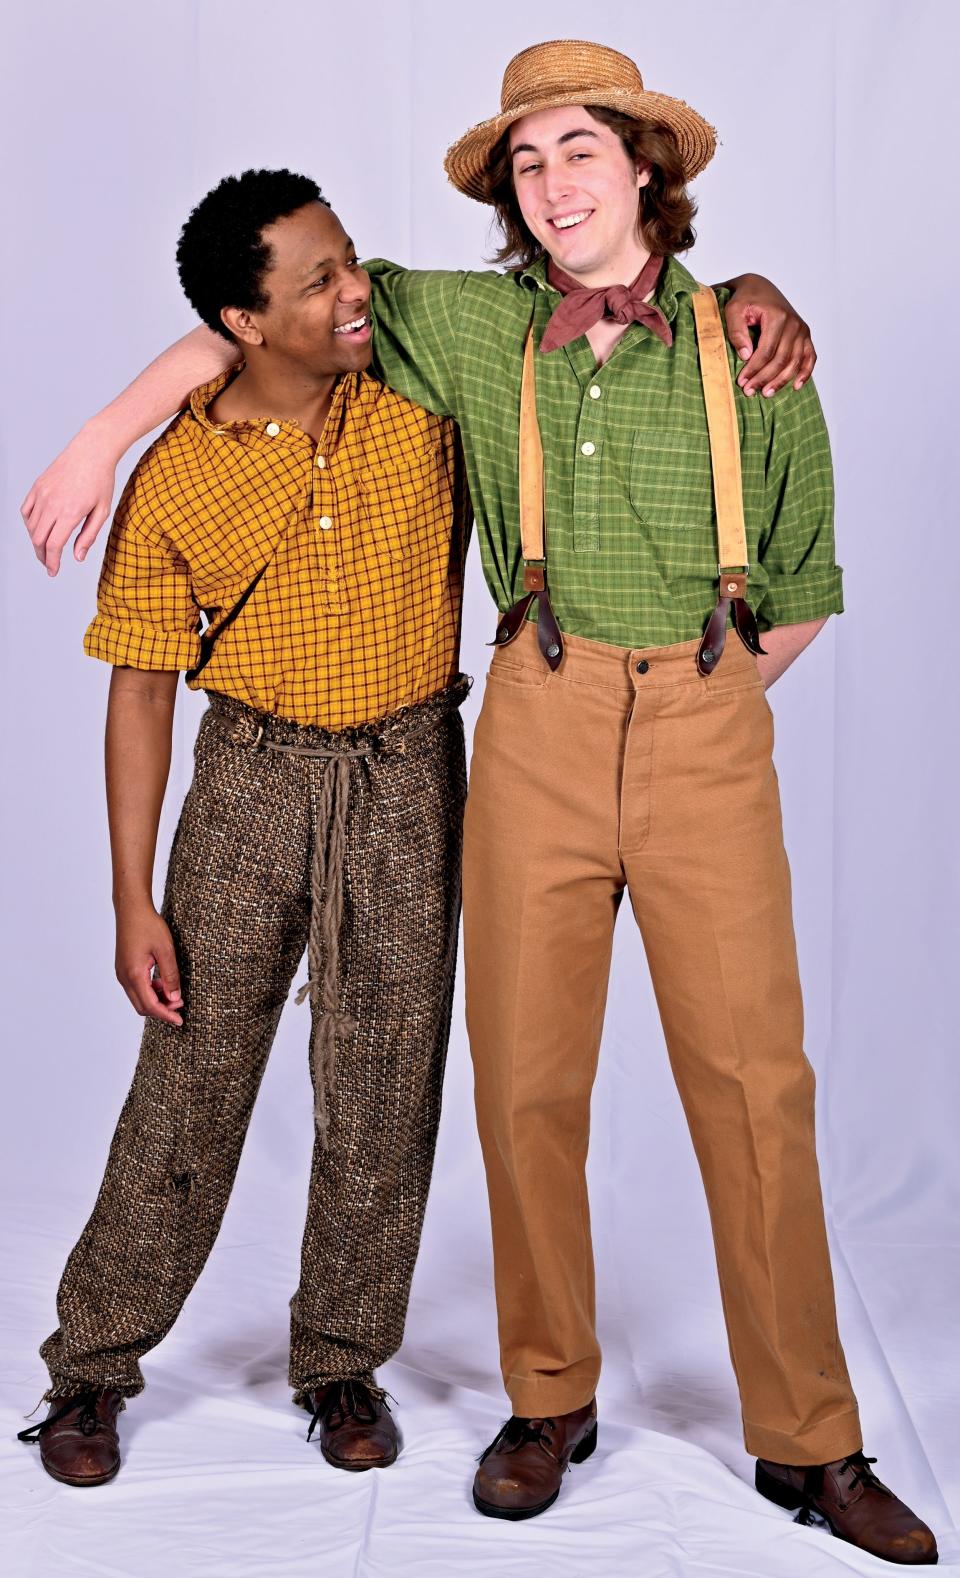 Maximus White stars as Jim and Alex Rodriguez as Hucklebery Finn in Lyric Theatre's "Big River: Theatre For Young Audiences Version."